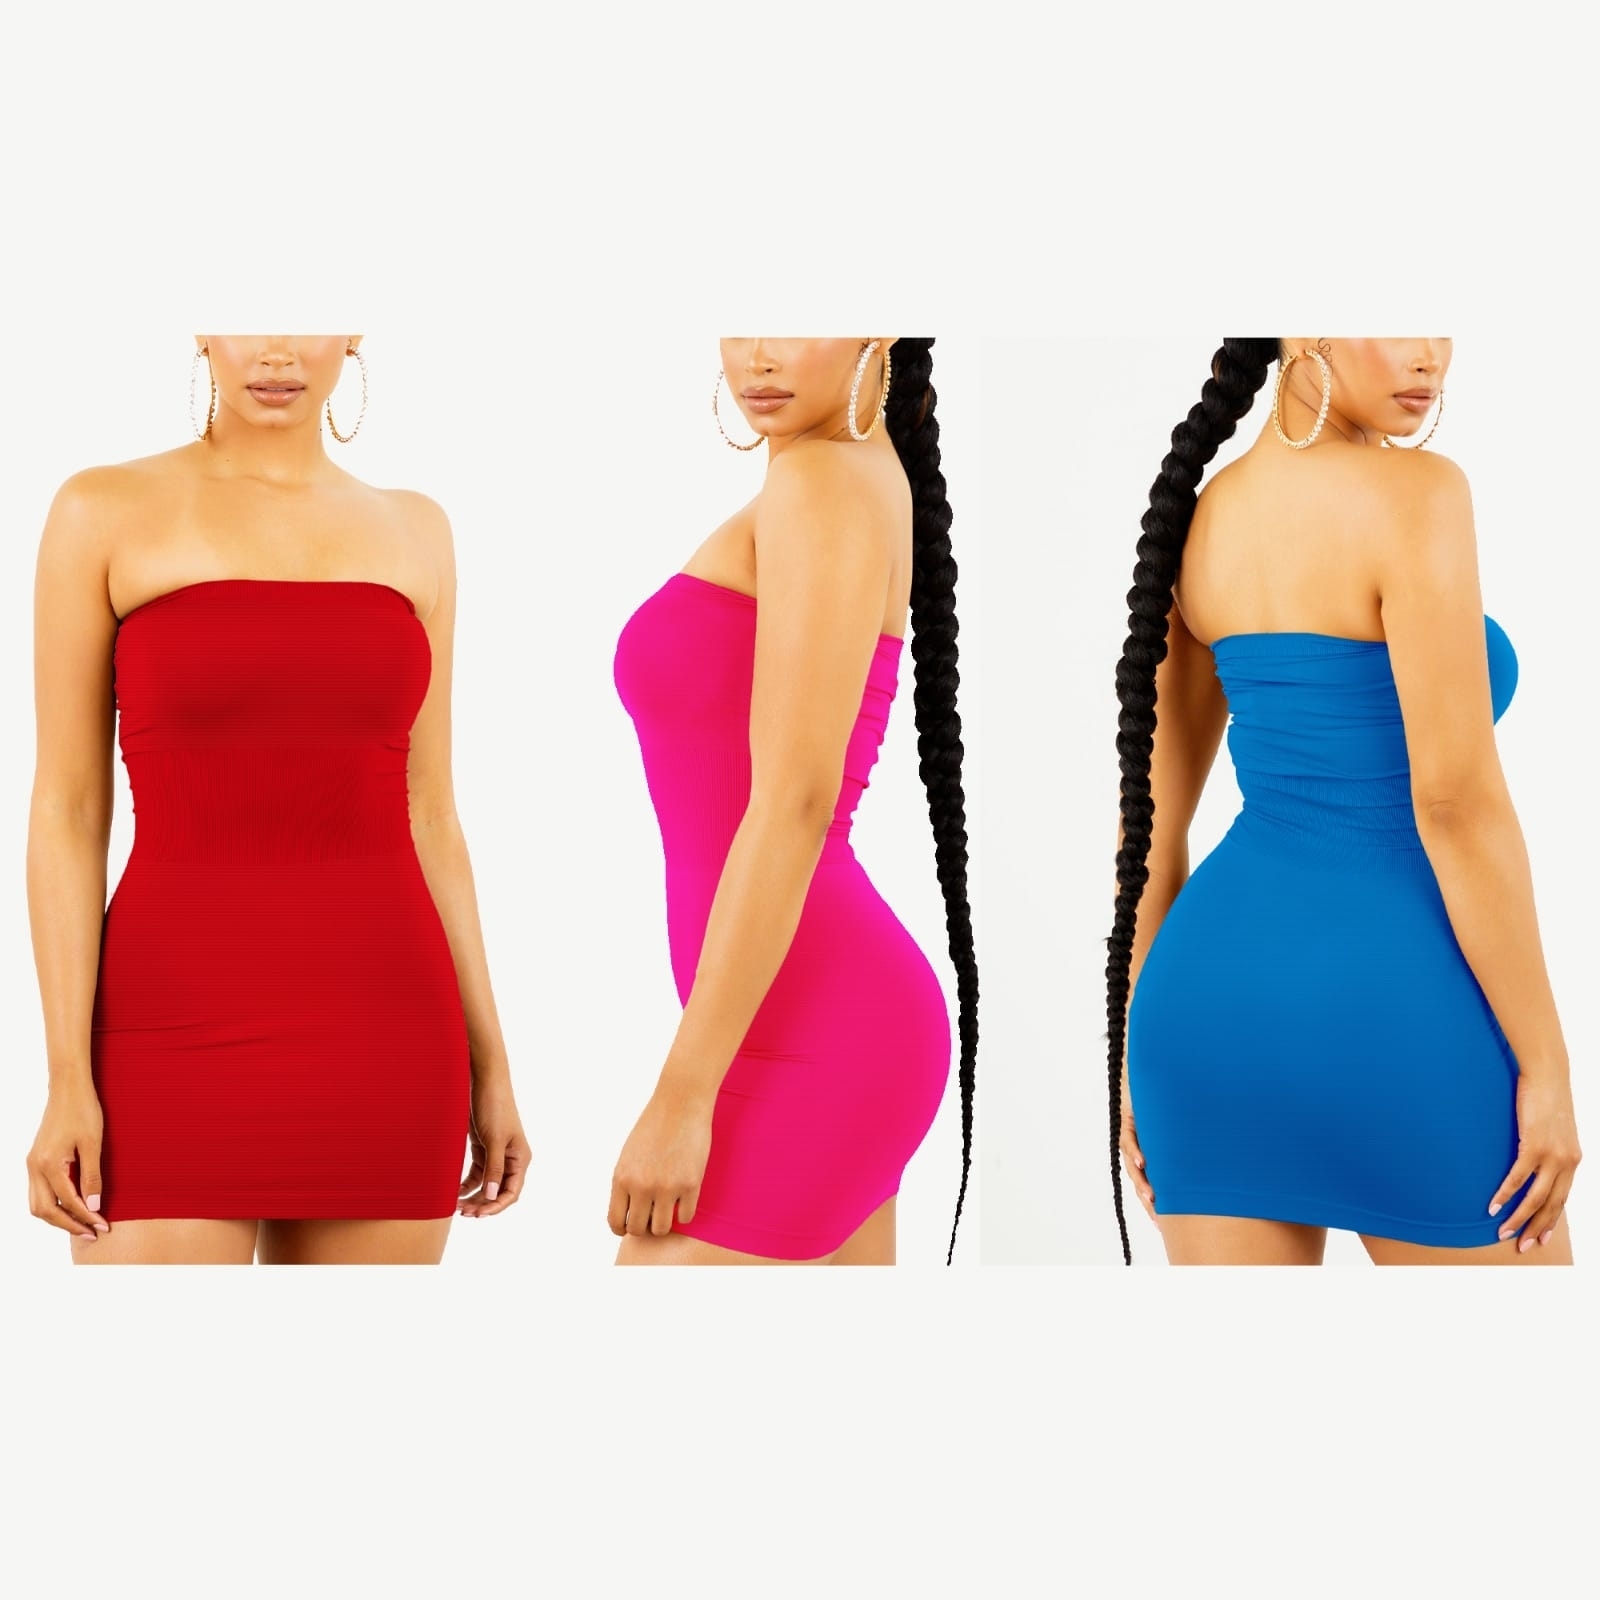 2-Pack Women's Strapless Stretchy Tight Fit Seamless Body Con Mini Tube Top Dress - BLUE, L